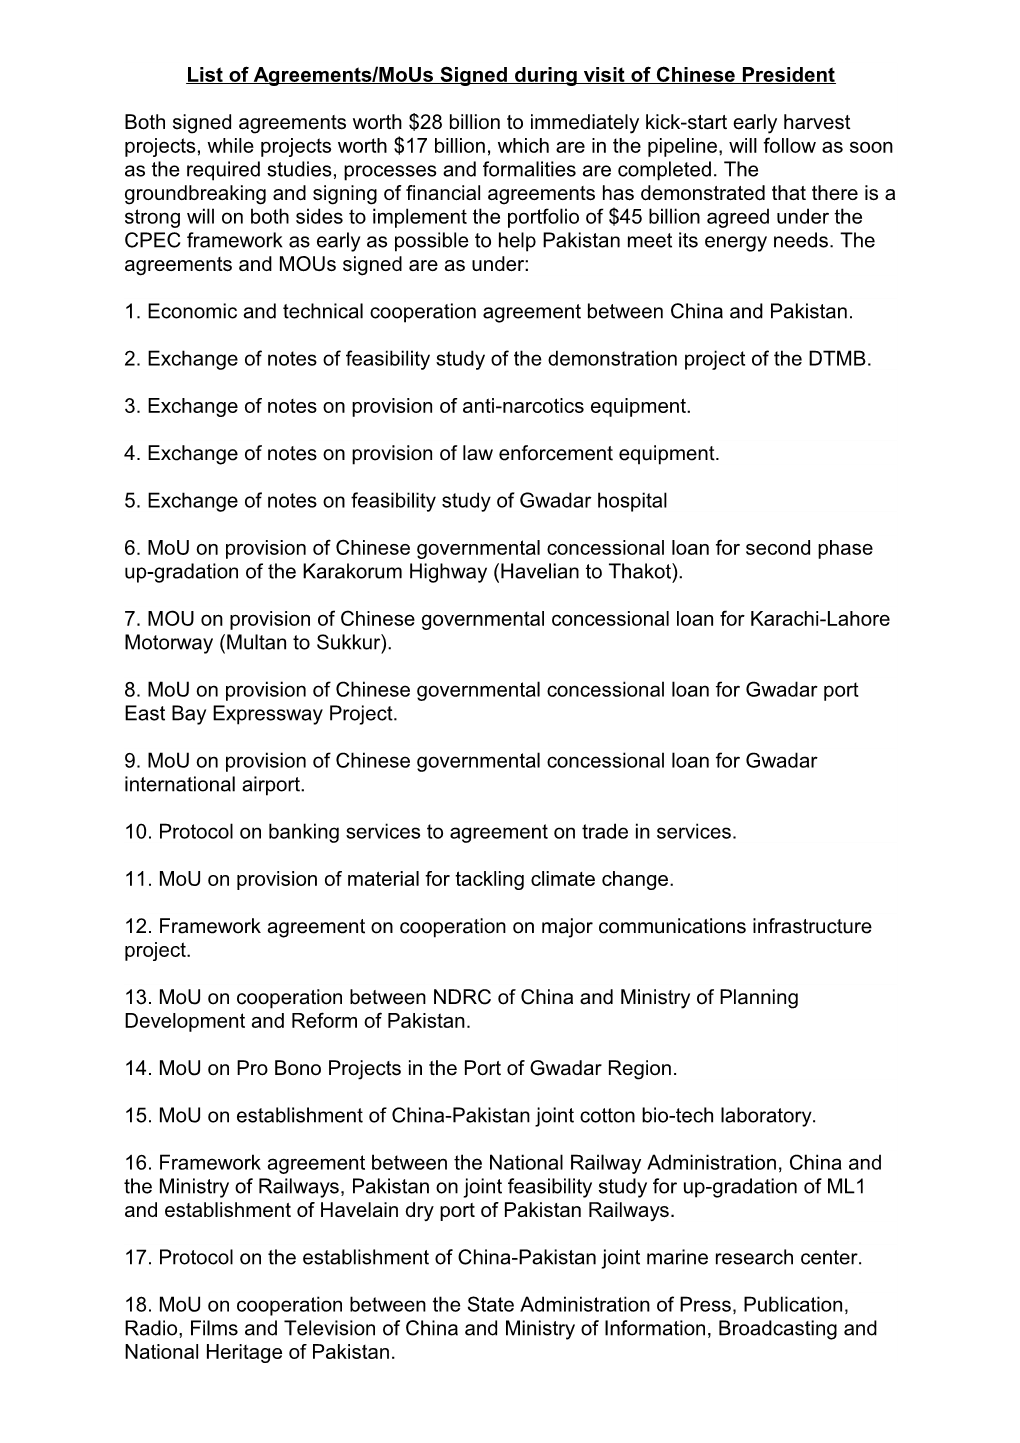 List of Agreements/Mous Signed During Visit of Chinese President